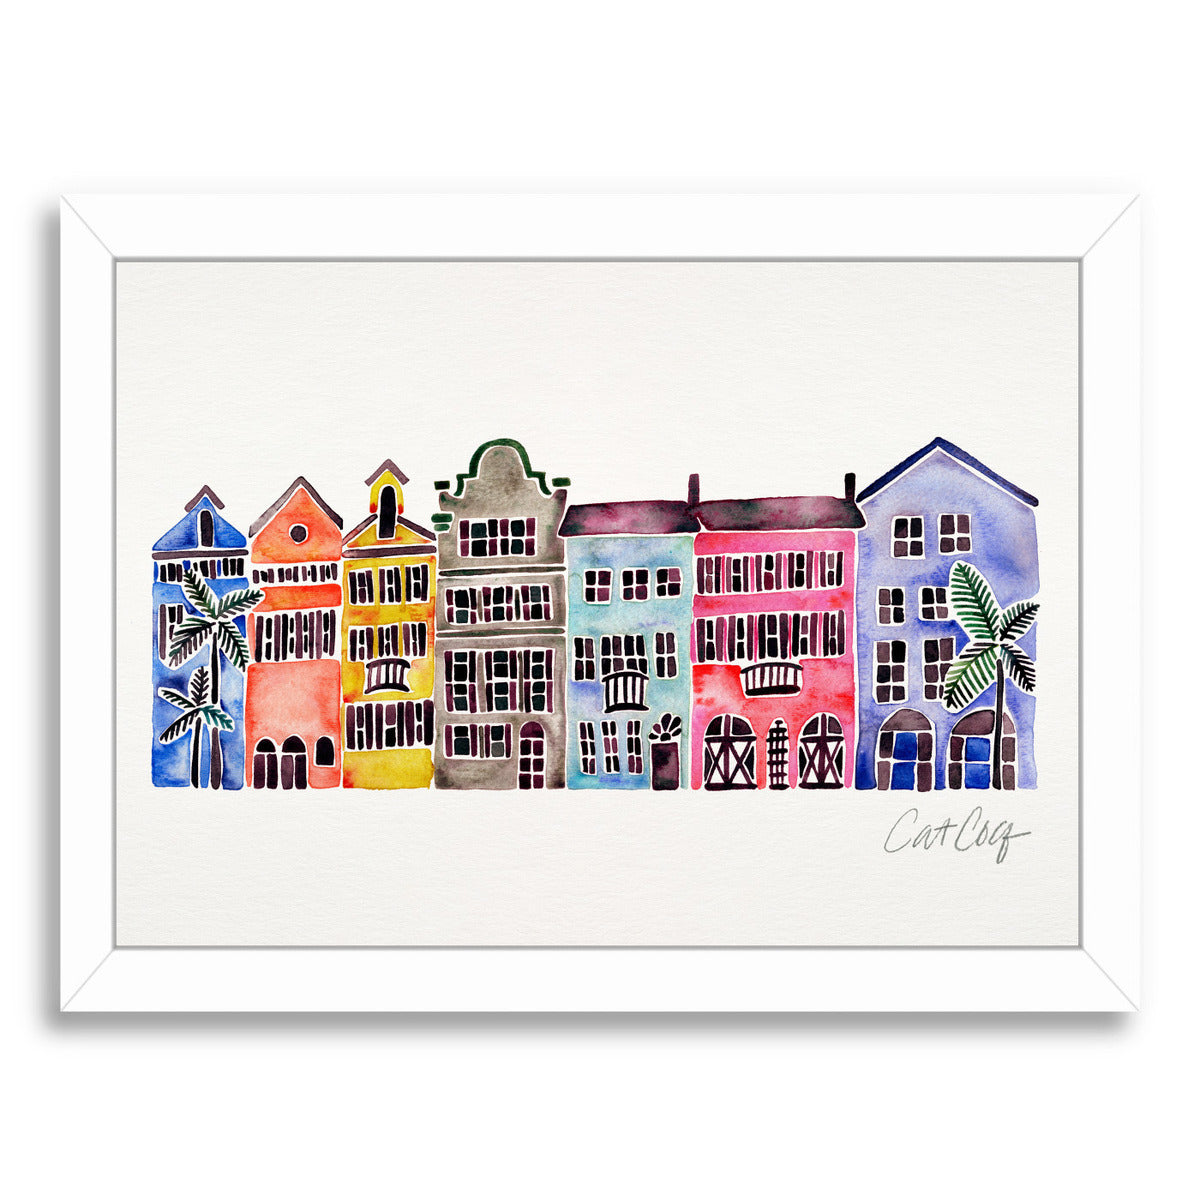 Rainbow Row by Cat Coquillette White Framed Print - Americanflat